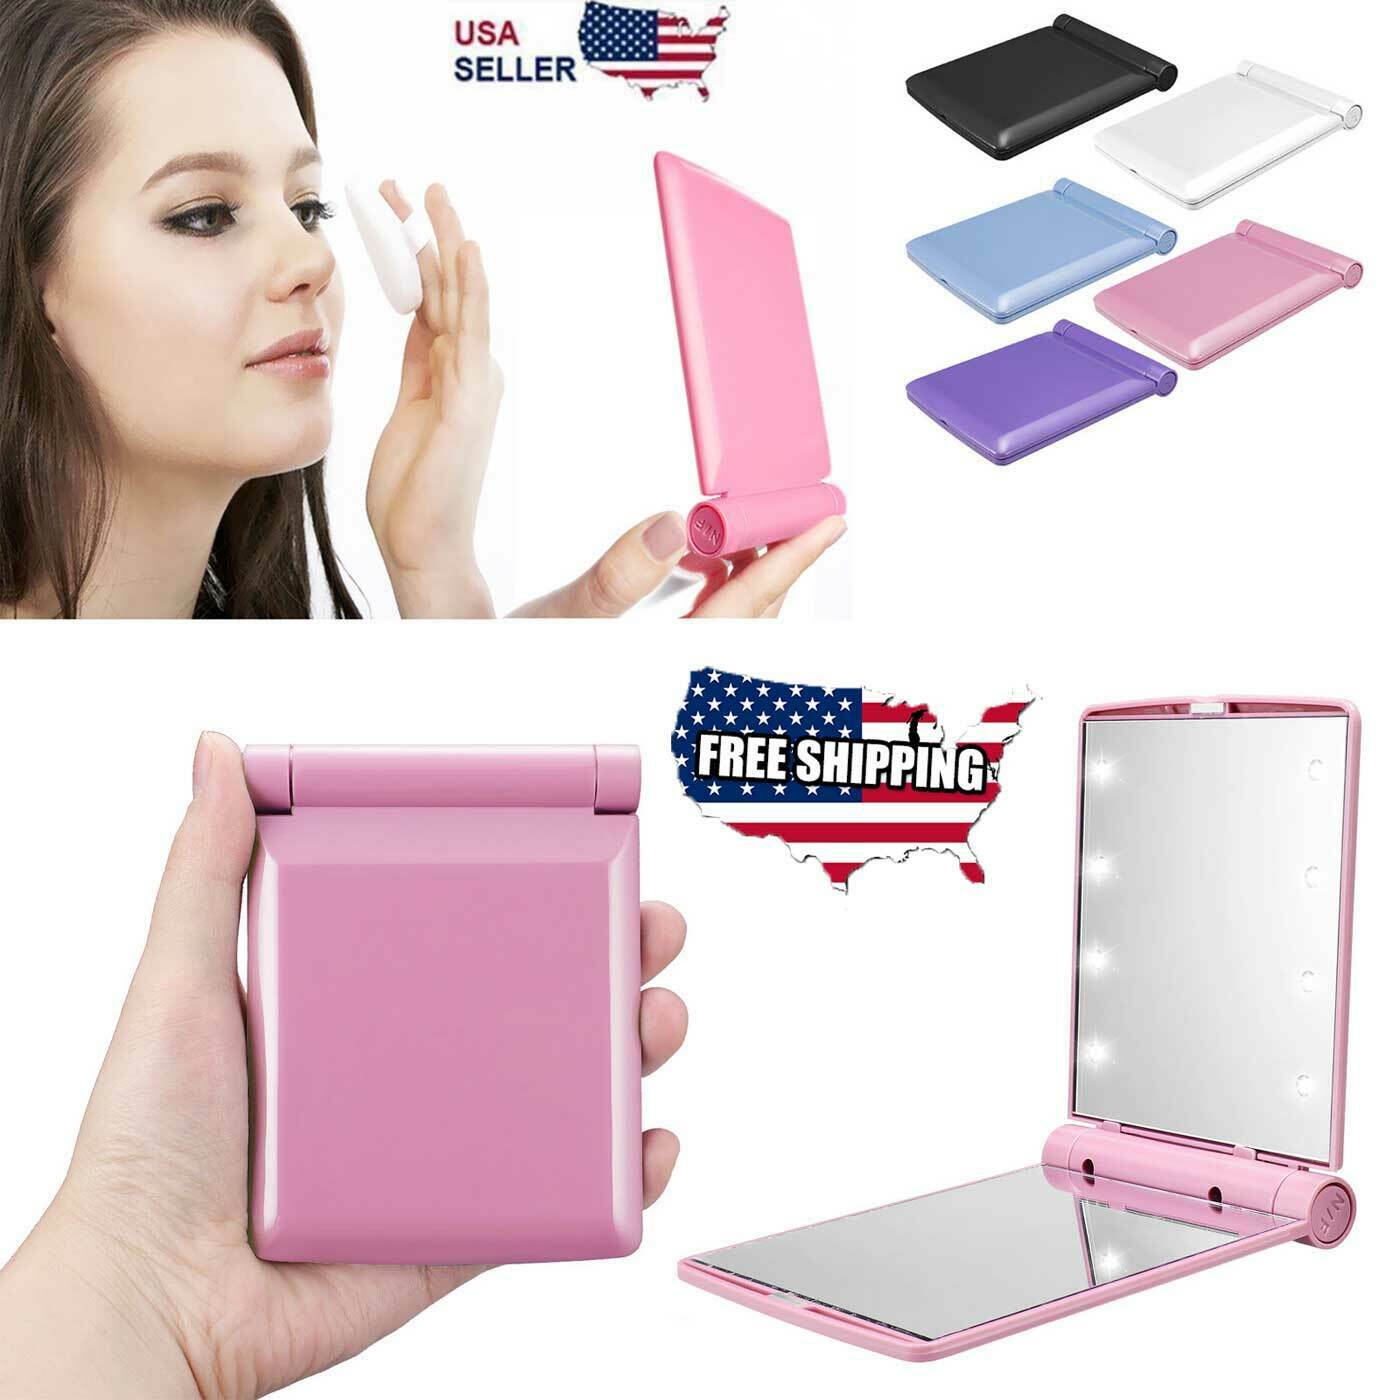 Makeup Compact Mirror Cosmetic Folding Portable Pocket With 8 Led Lights Lamps